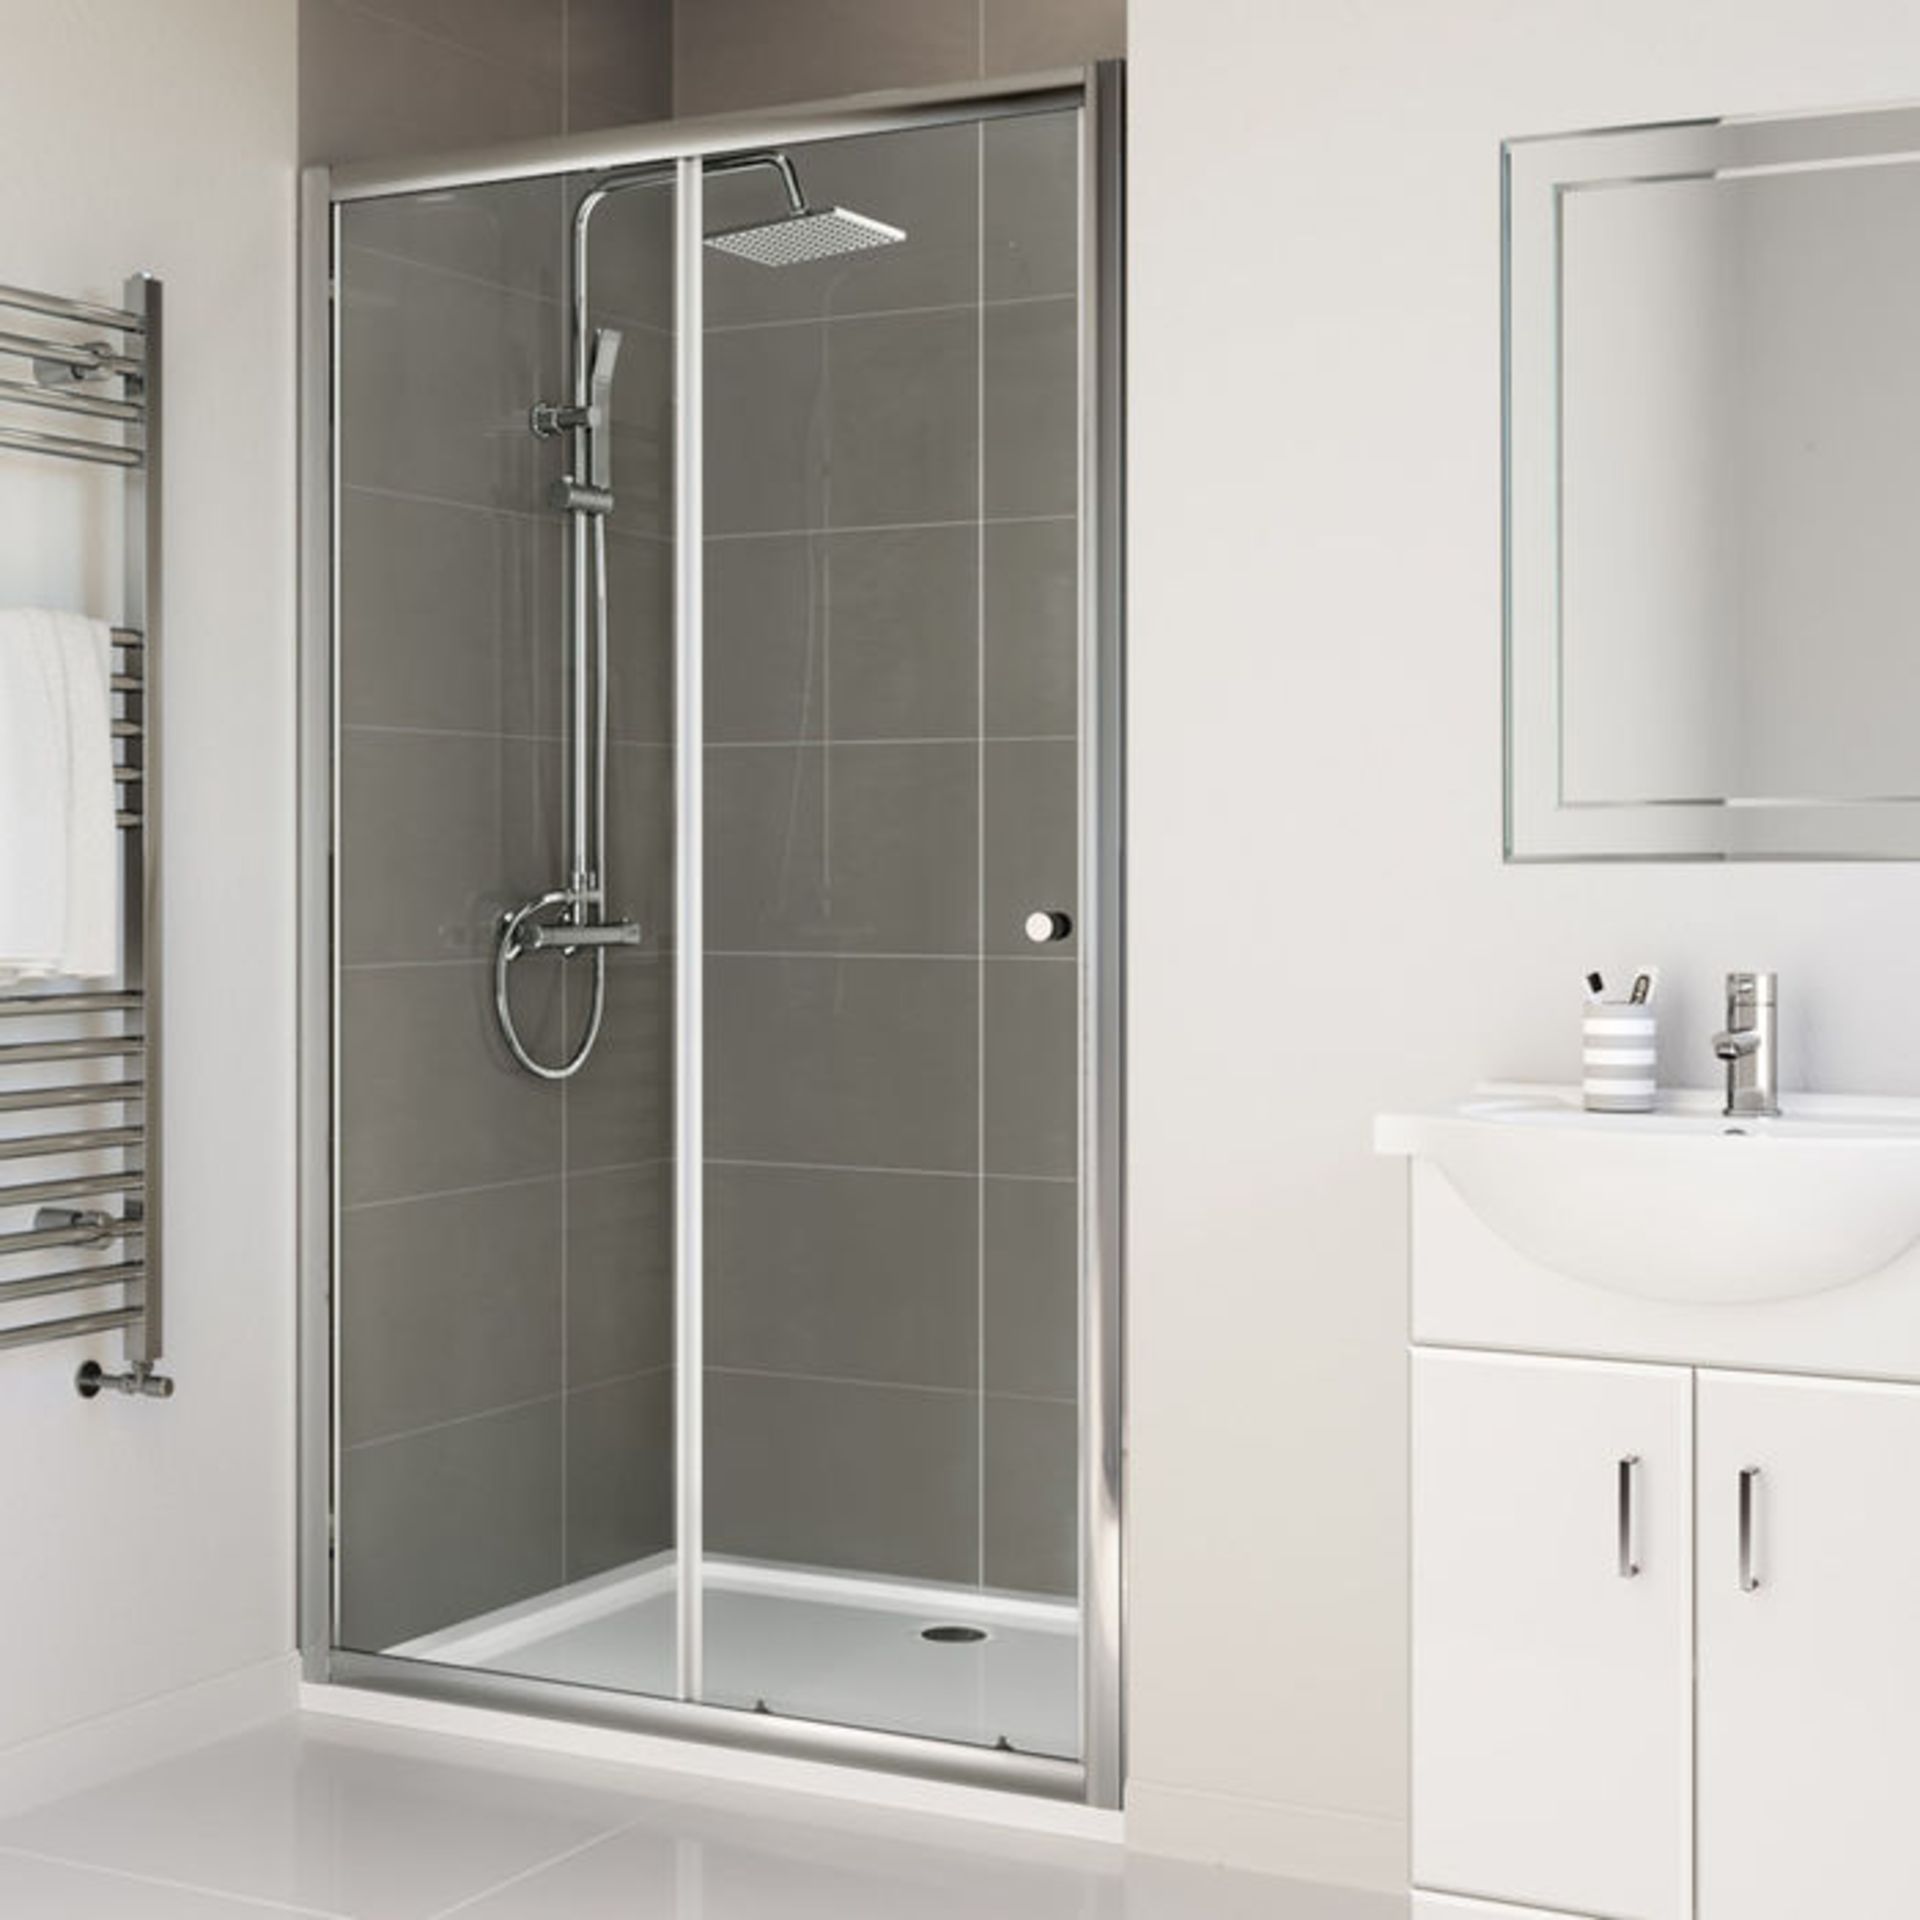 (PJ238) 1100mm - Elements Sliding Shower Door. RRP £299.99. 4mm Safety Glass Fully waterproof tested